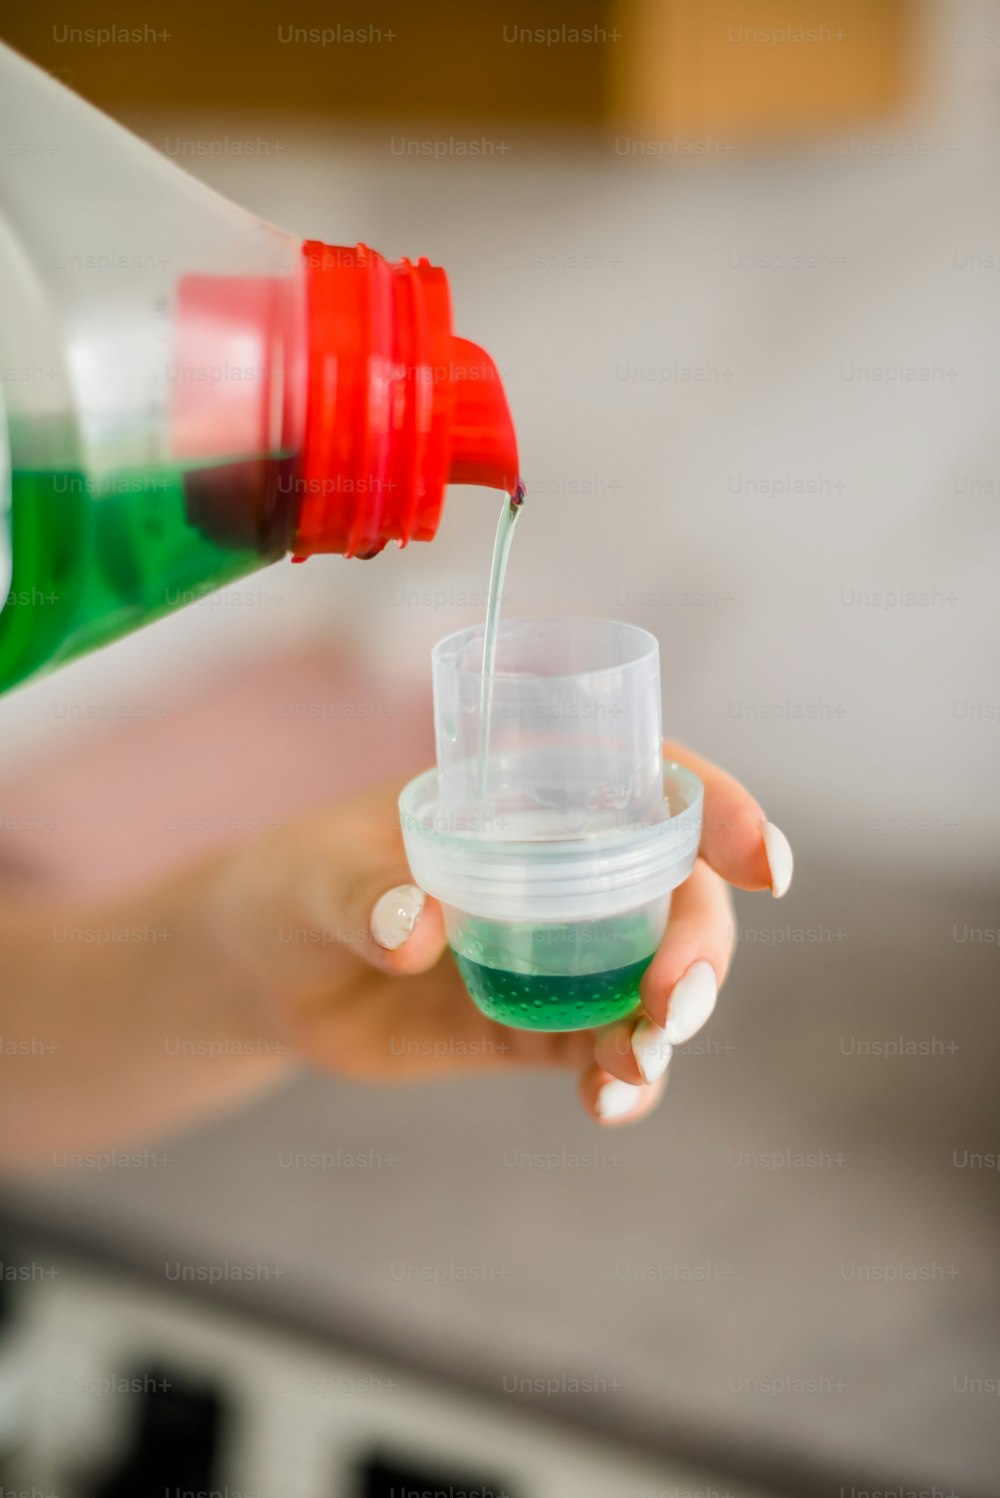 a person is holding a container with a liquid in it